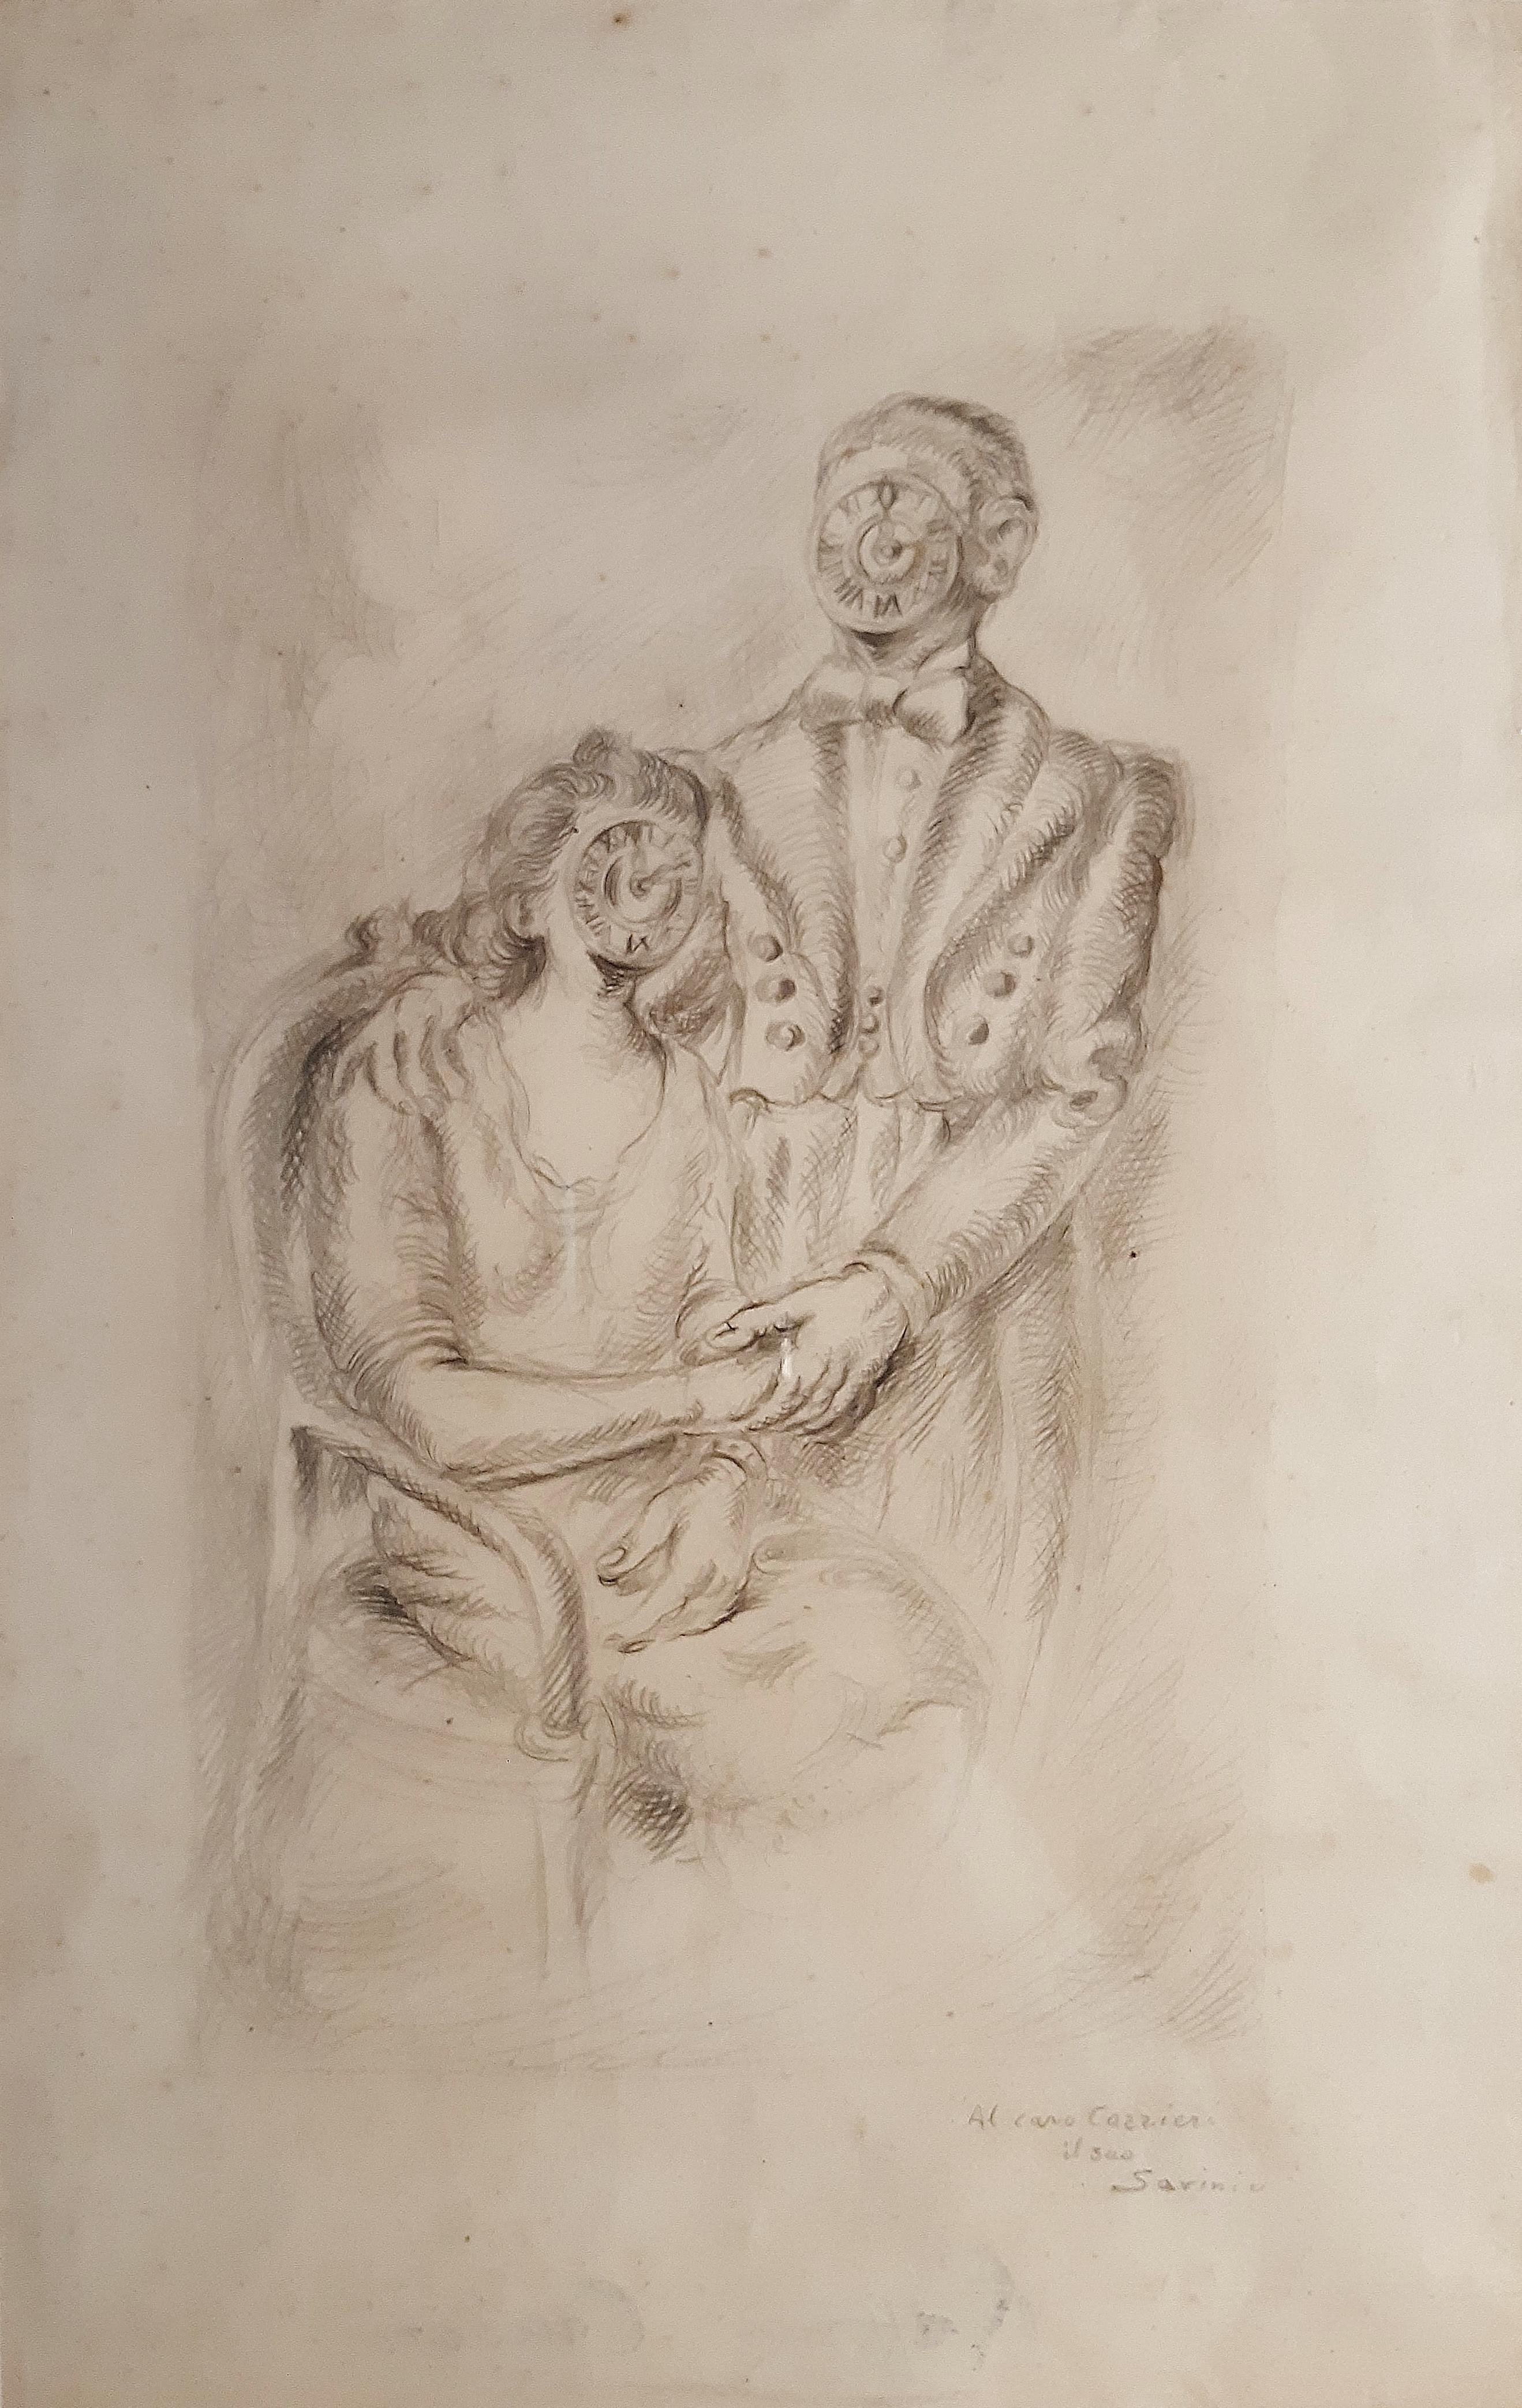 Marital portrait is a modern artwork realized by Alberto Savinio in 1948.

Pencil on paper.

Hand signed by the artist and dedicated to Raffaele Carrieri.

Certificate of authenticity by Ruggero Savinio on photo.